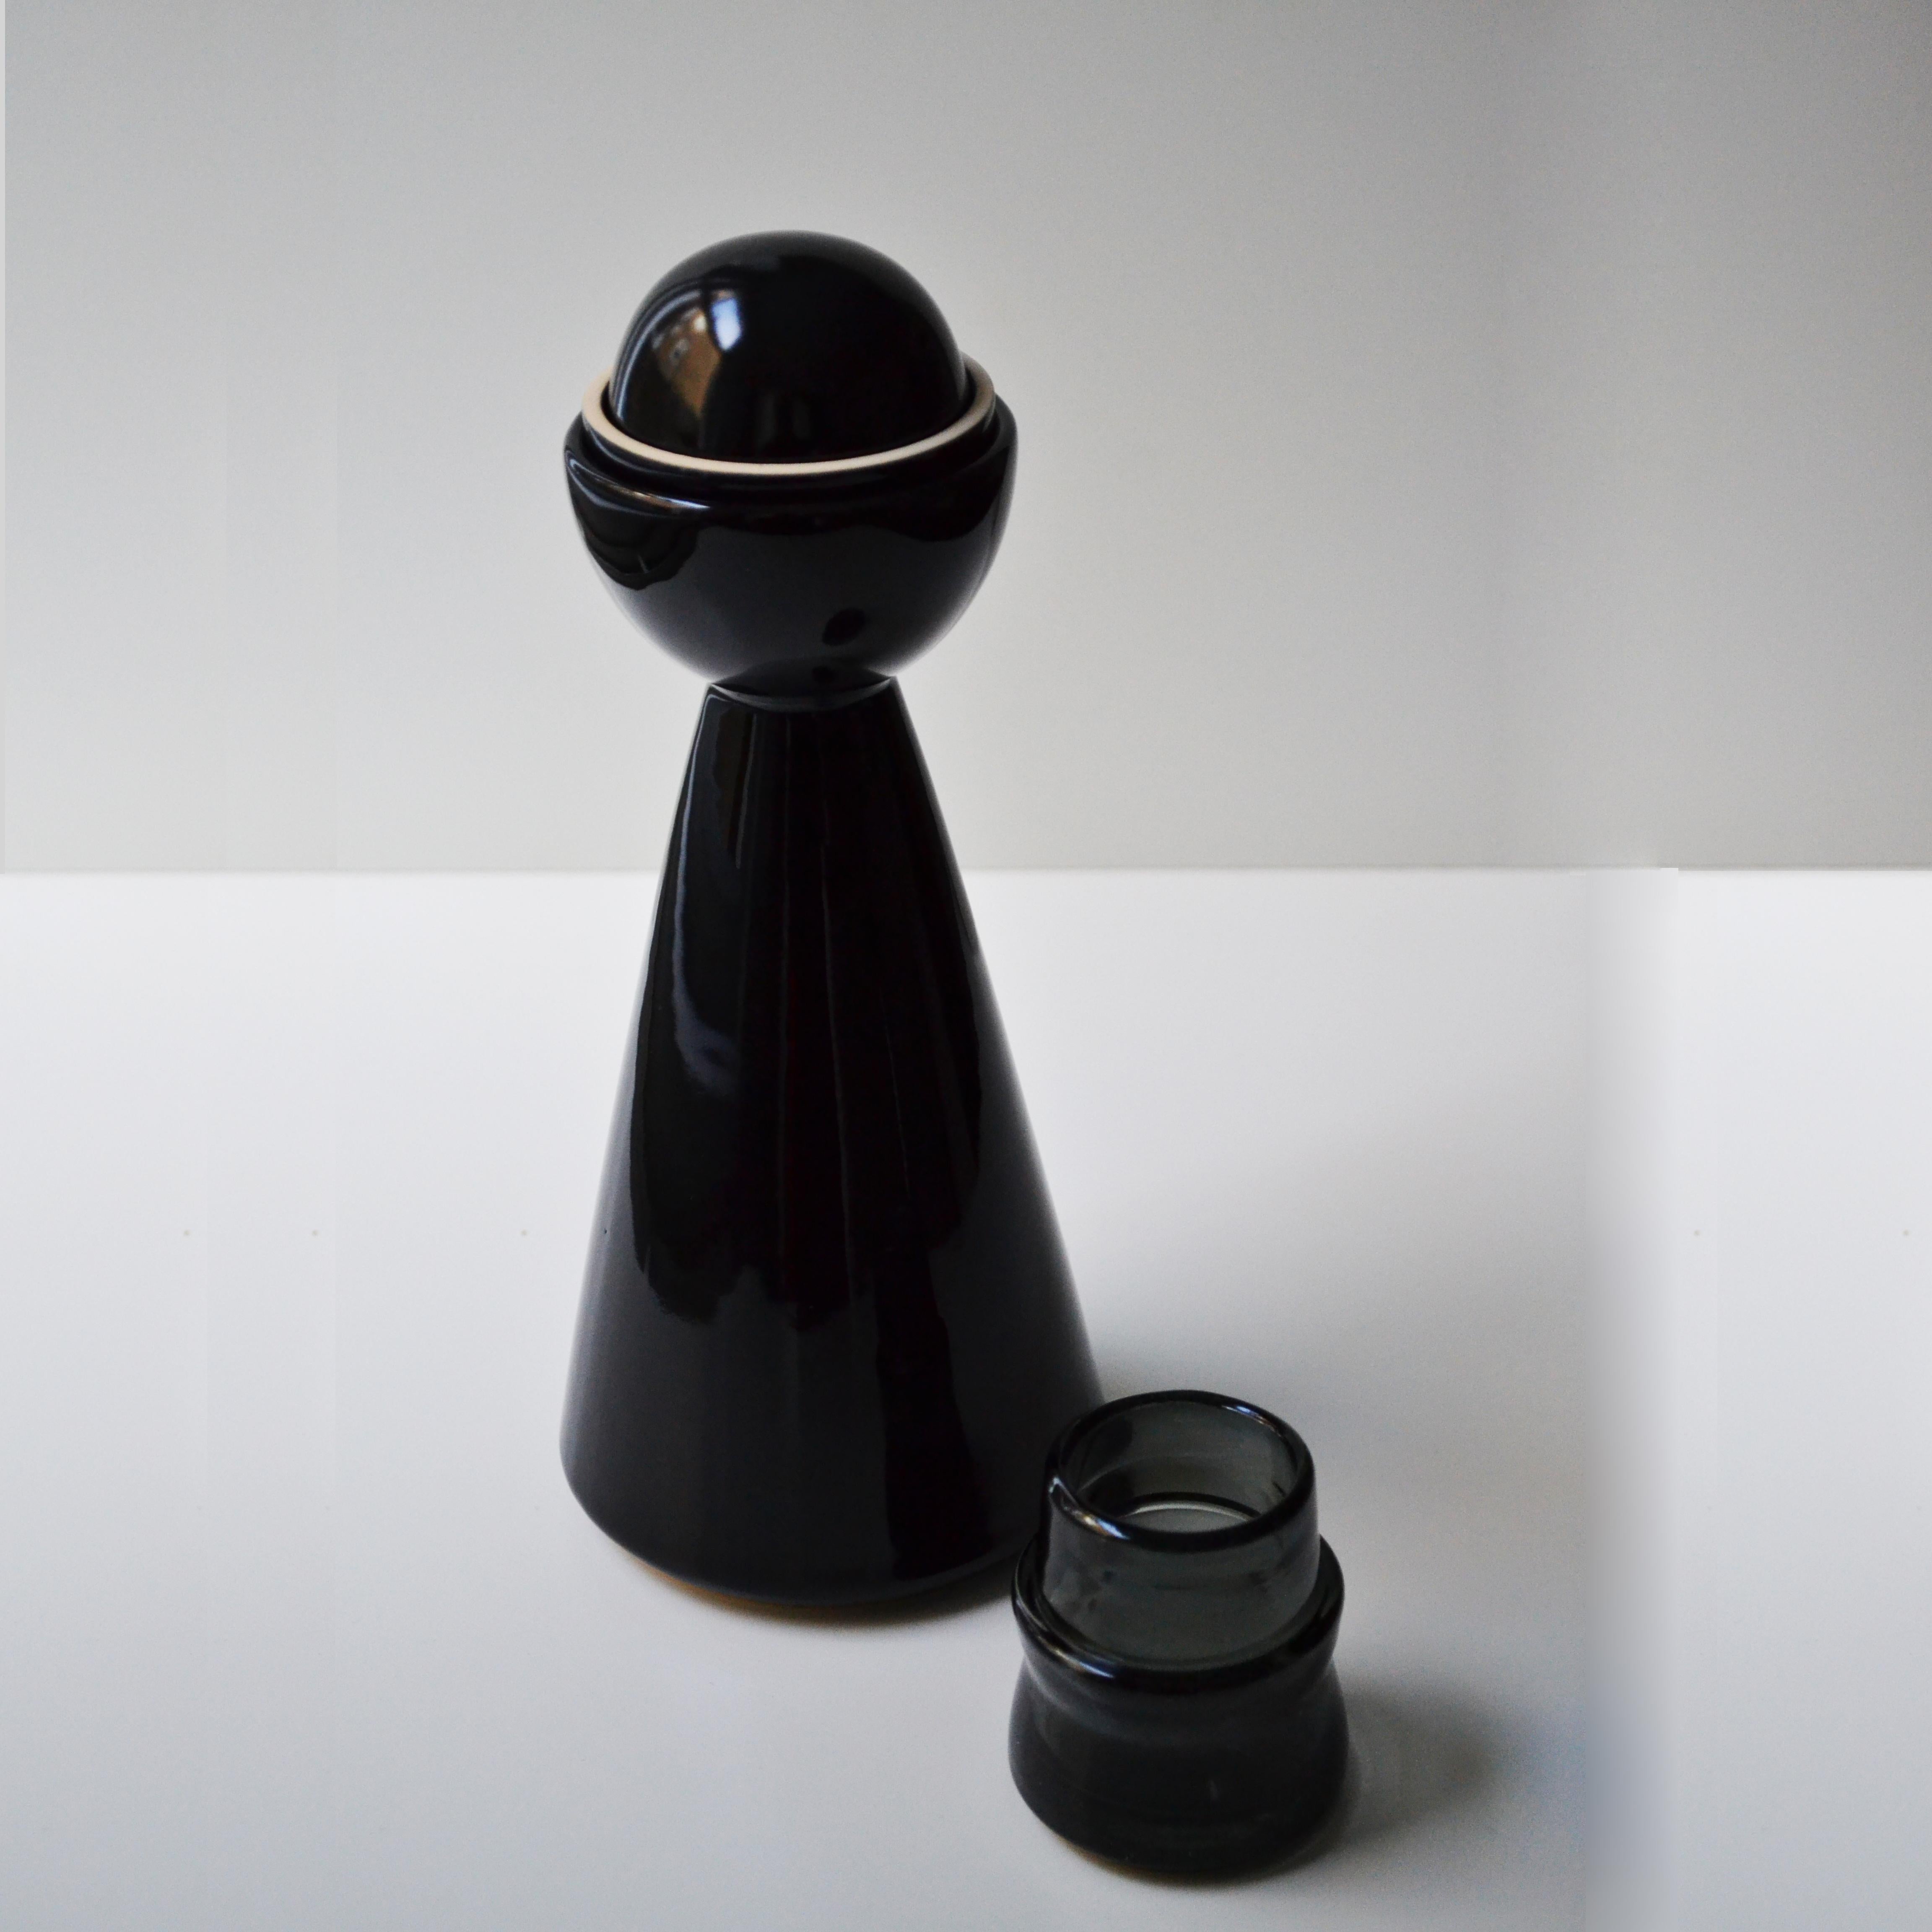 Special Edition Ceramic Carafe and Cups Shine Black Mezcal bottle Halfmoon For Sale 4